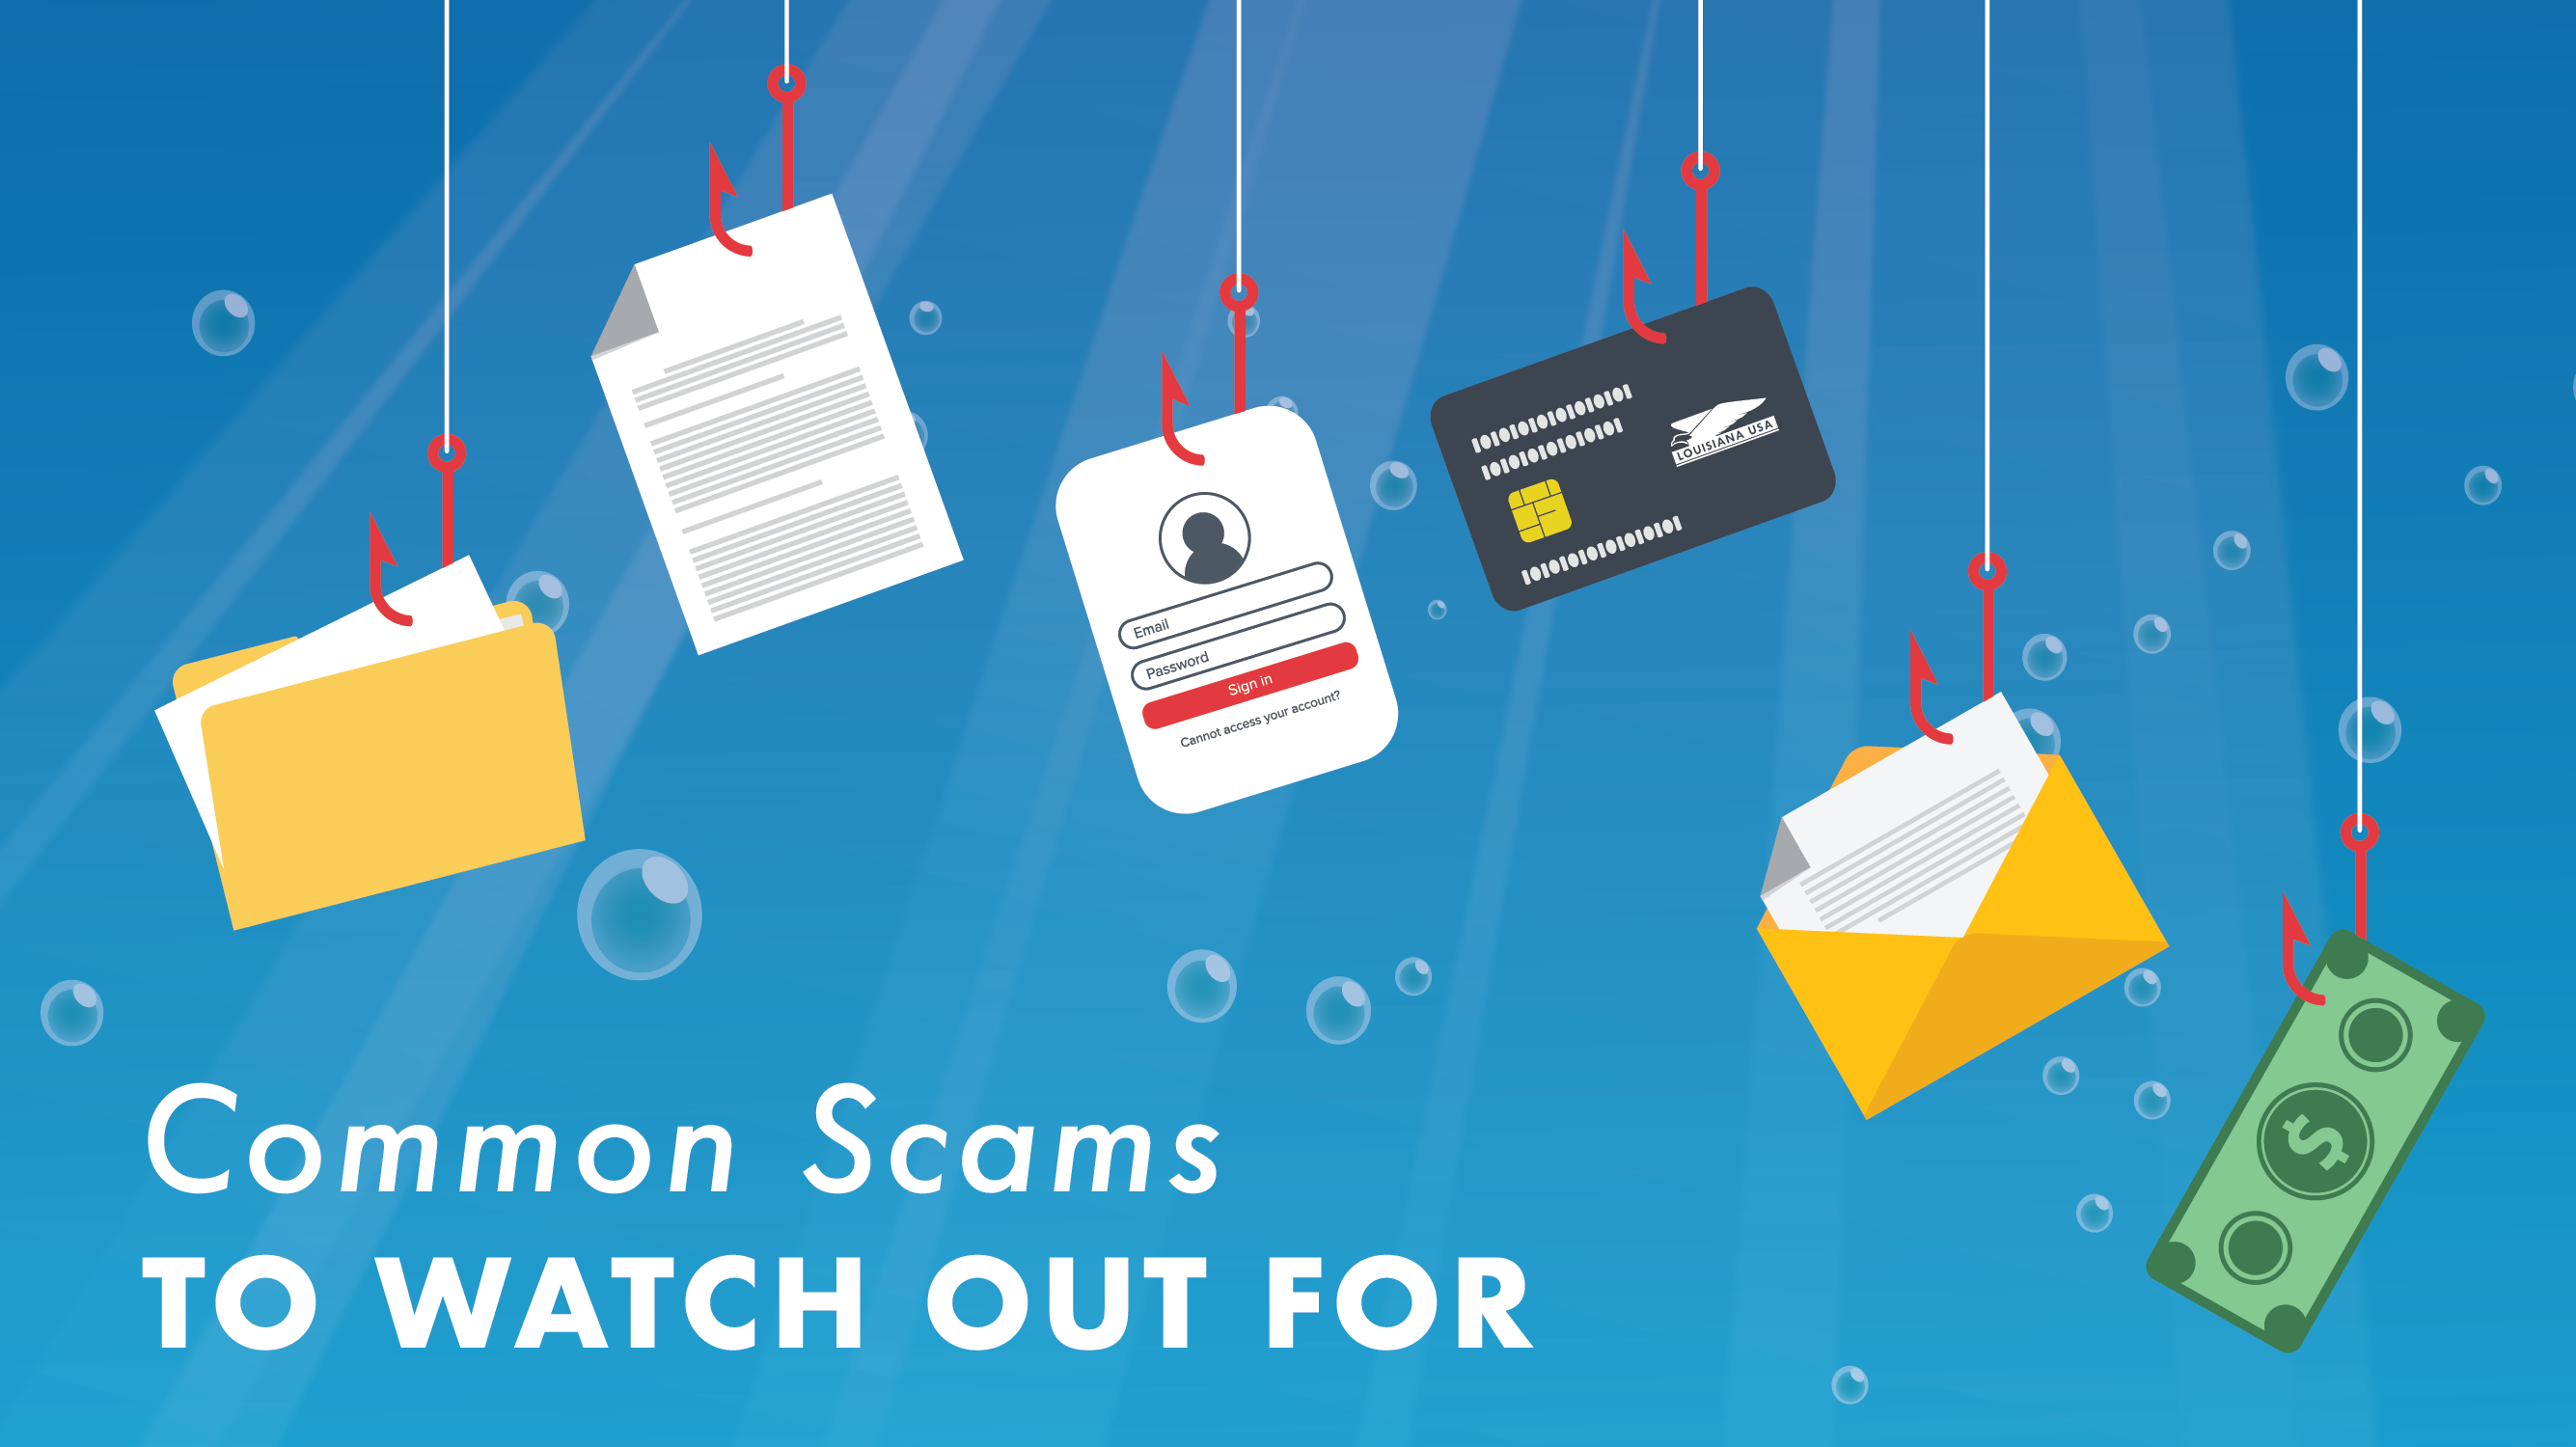 Common Scams To Watch Out For